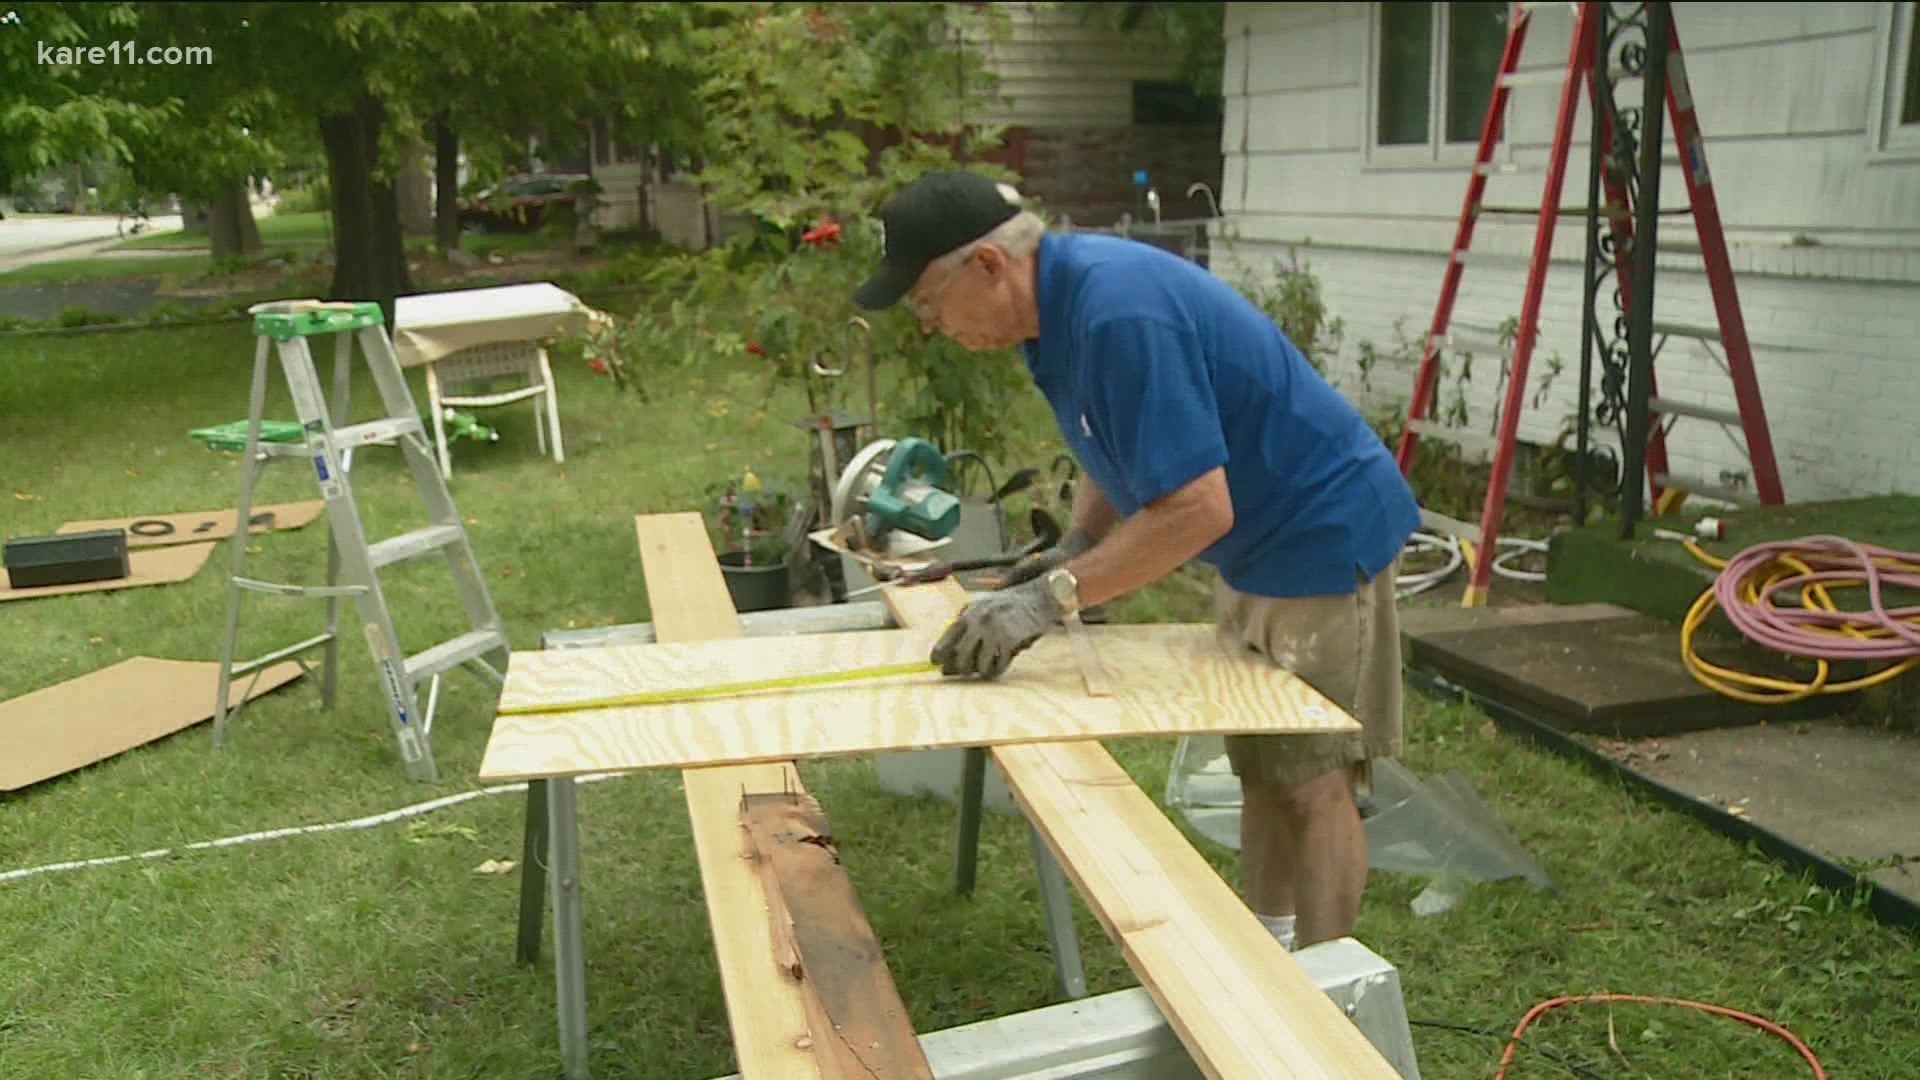 After 30 years for Graco, one volunteer is using the tools he helped create to rehab a Brooklyn Center home with co-workers on "Communities that KARE."